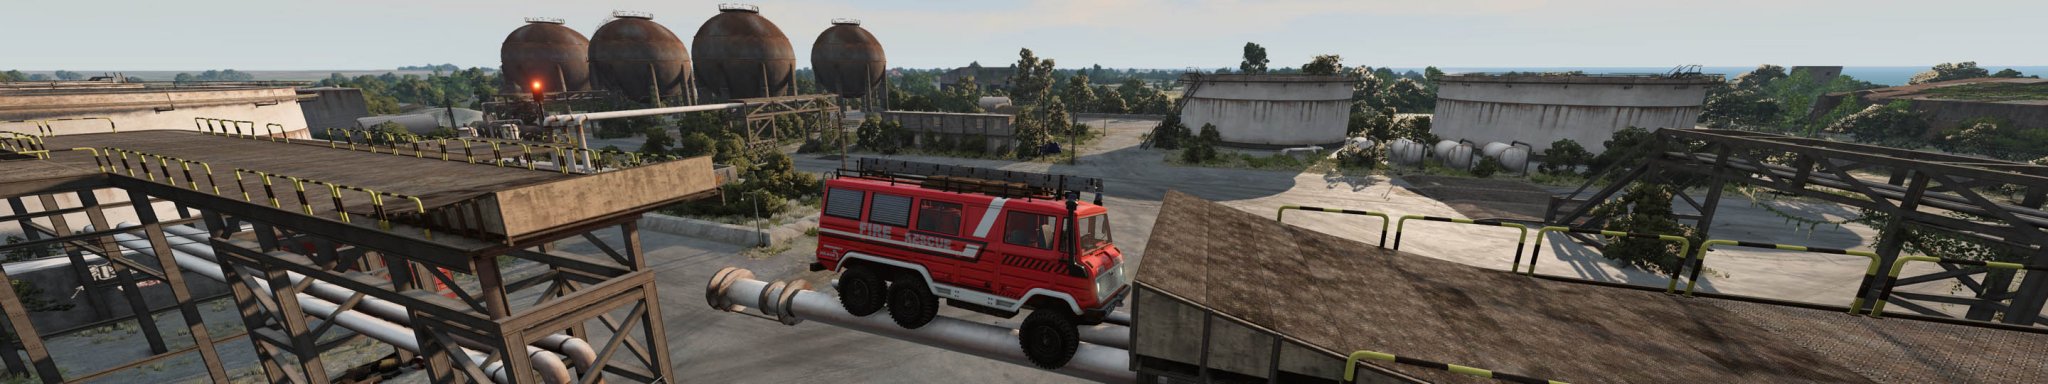 7 BeamNG STAMBECCO FP at INDUSTRIAL copy.jpg